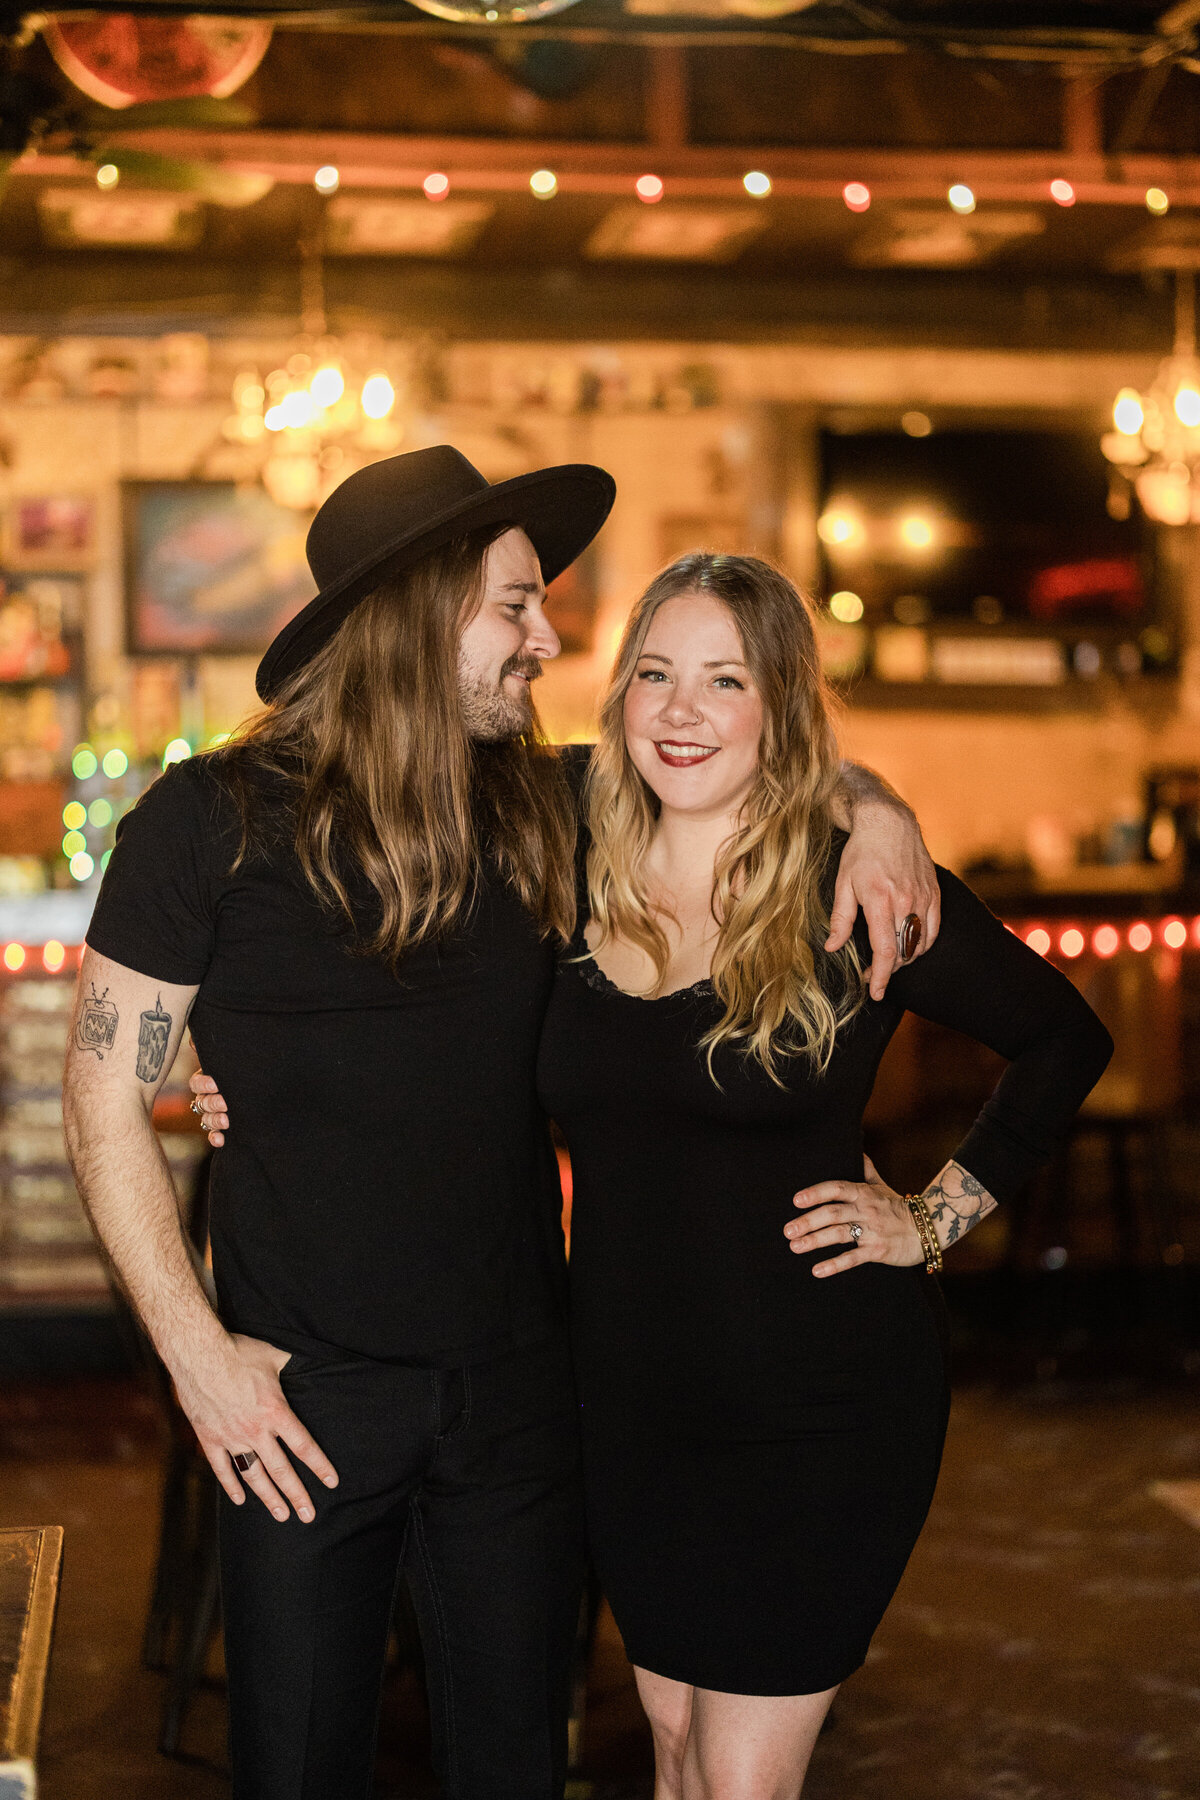 A couple smiling and holding each other close in a bar during their engagement session in Fort Worth, Texas. The woman on the right is wearing a short, black dress while the man on the right is wearing a black shirt, black pants, and a black hat. They both have tattoos on their arms.